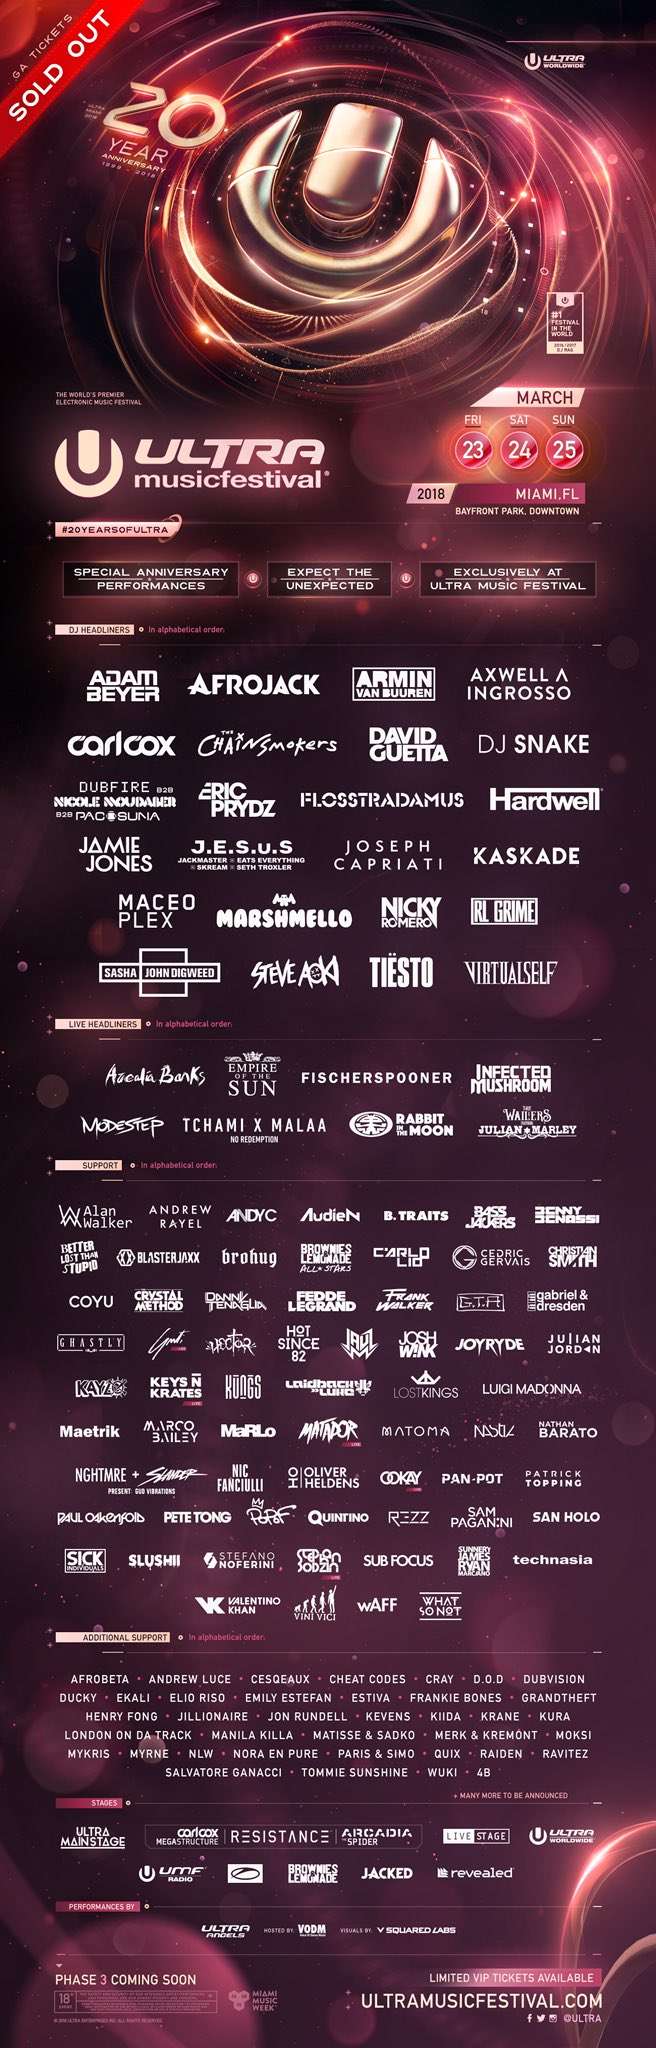 Ultra Music Festival Finally Drops Phase 2 For 20th Anniversary FULL LINEUP]